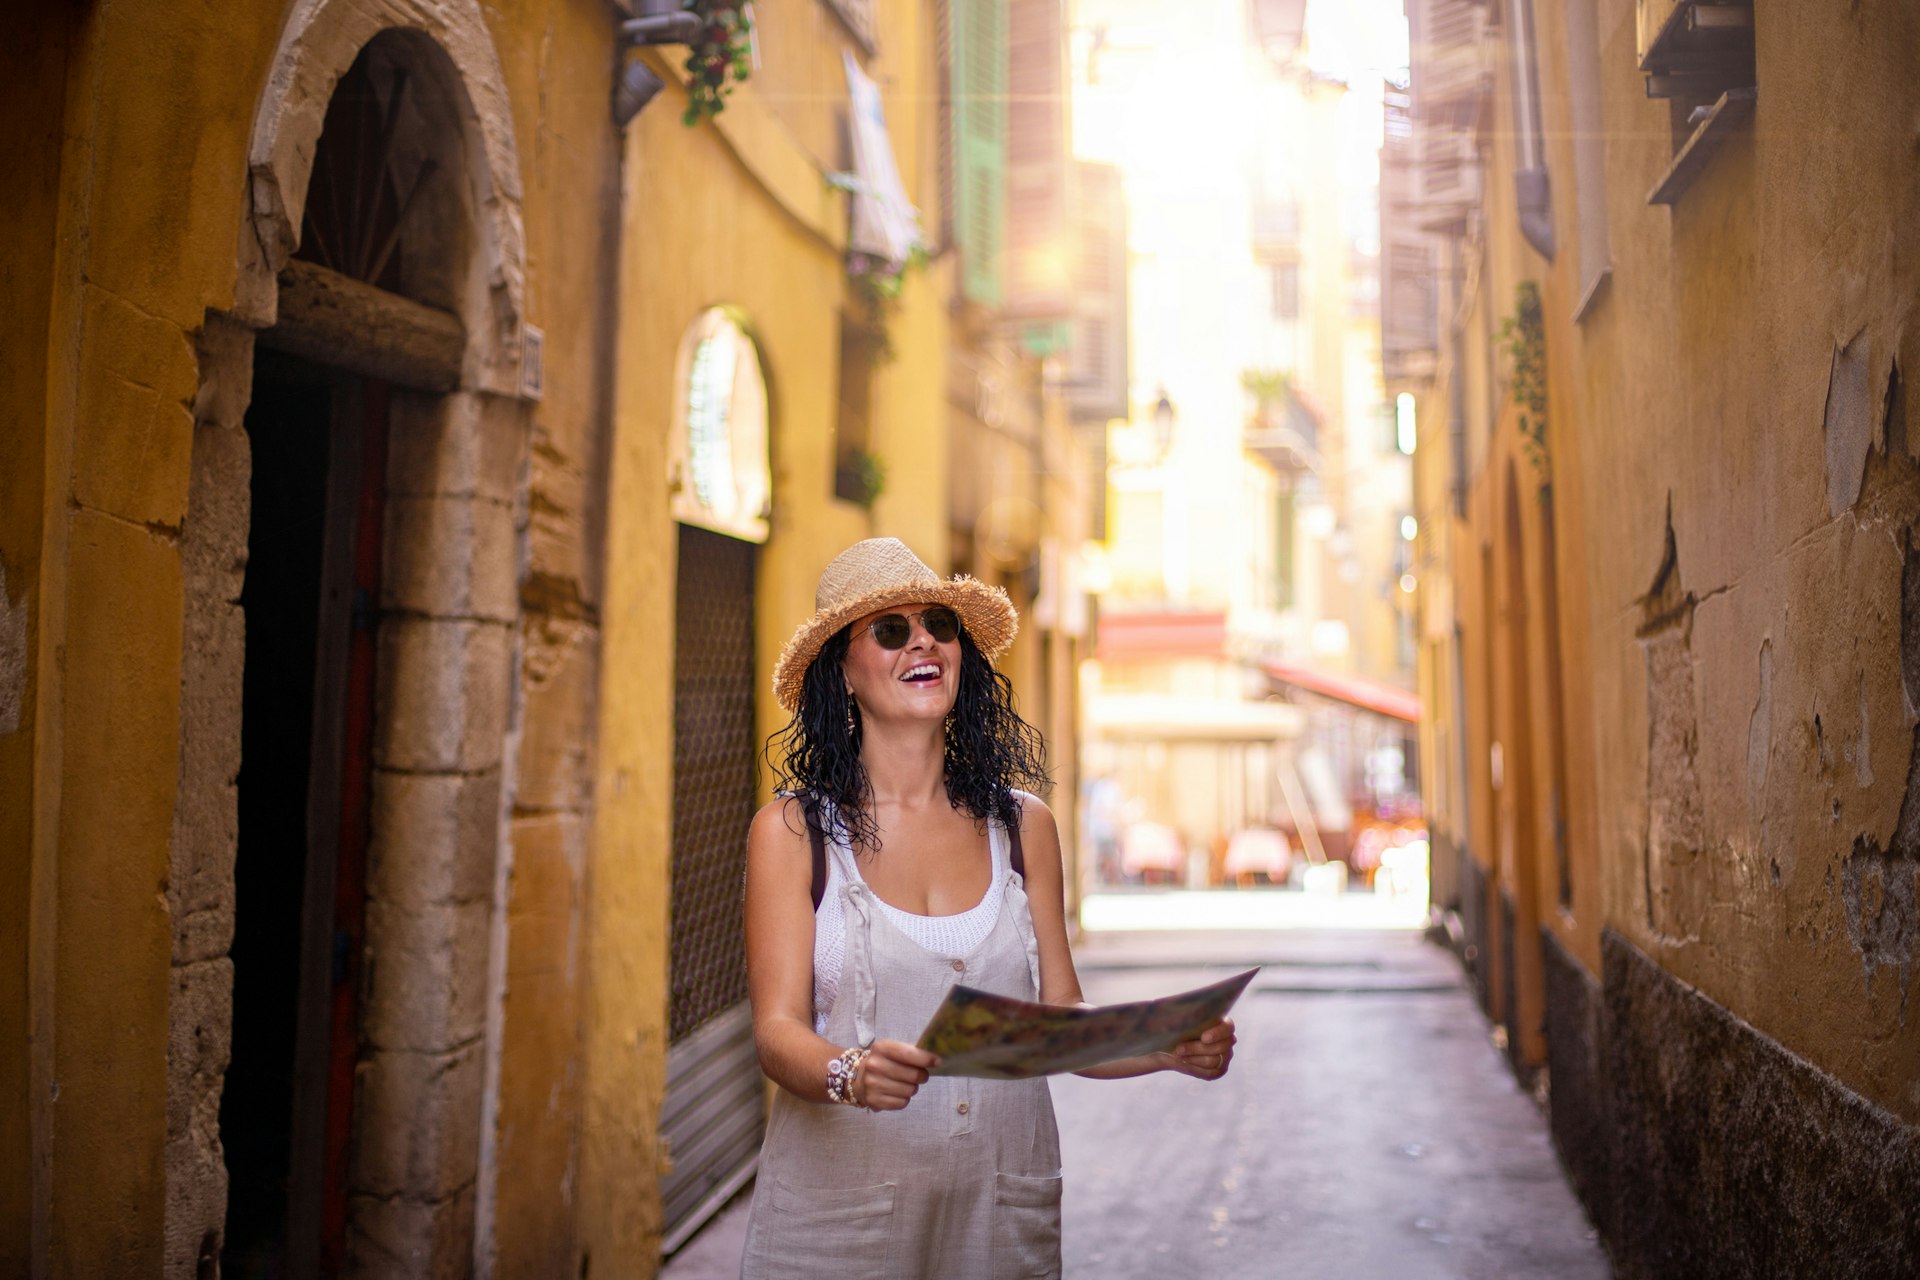 A tourist woman walking at the narrow streets of the old town in Nice, France.